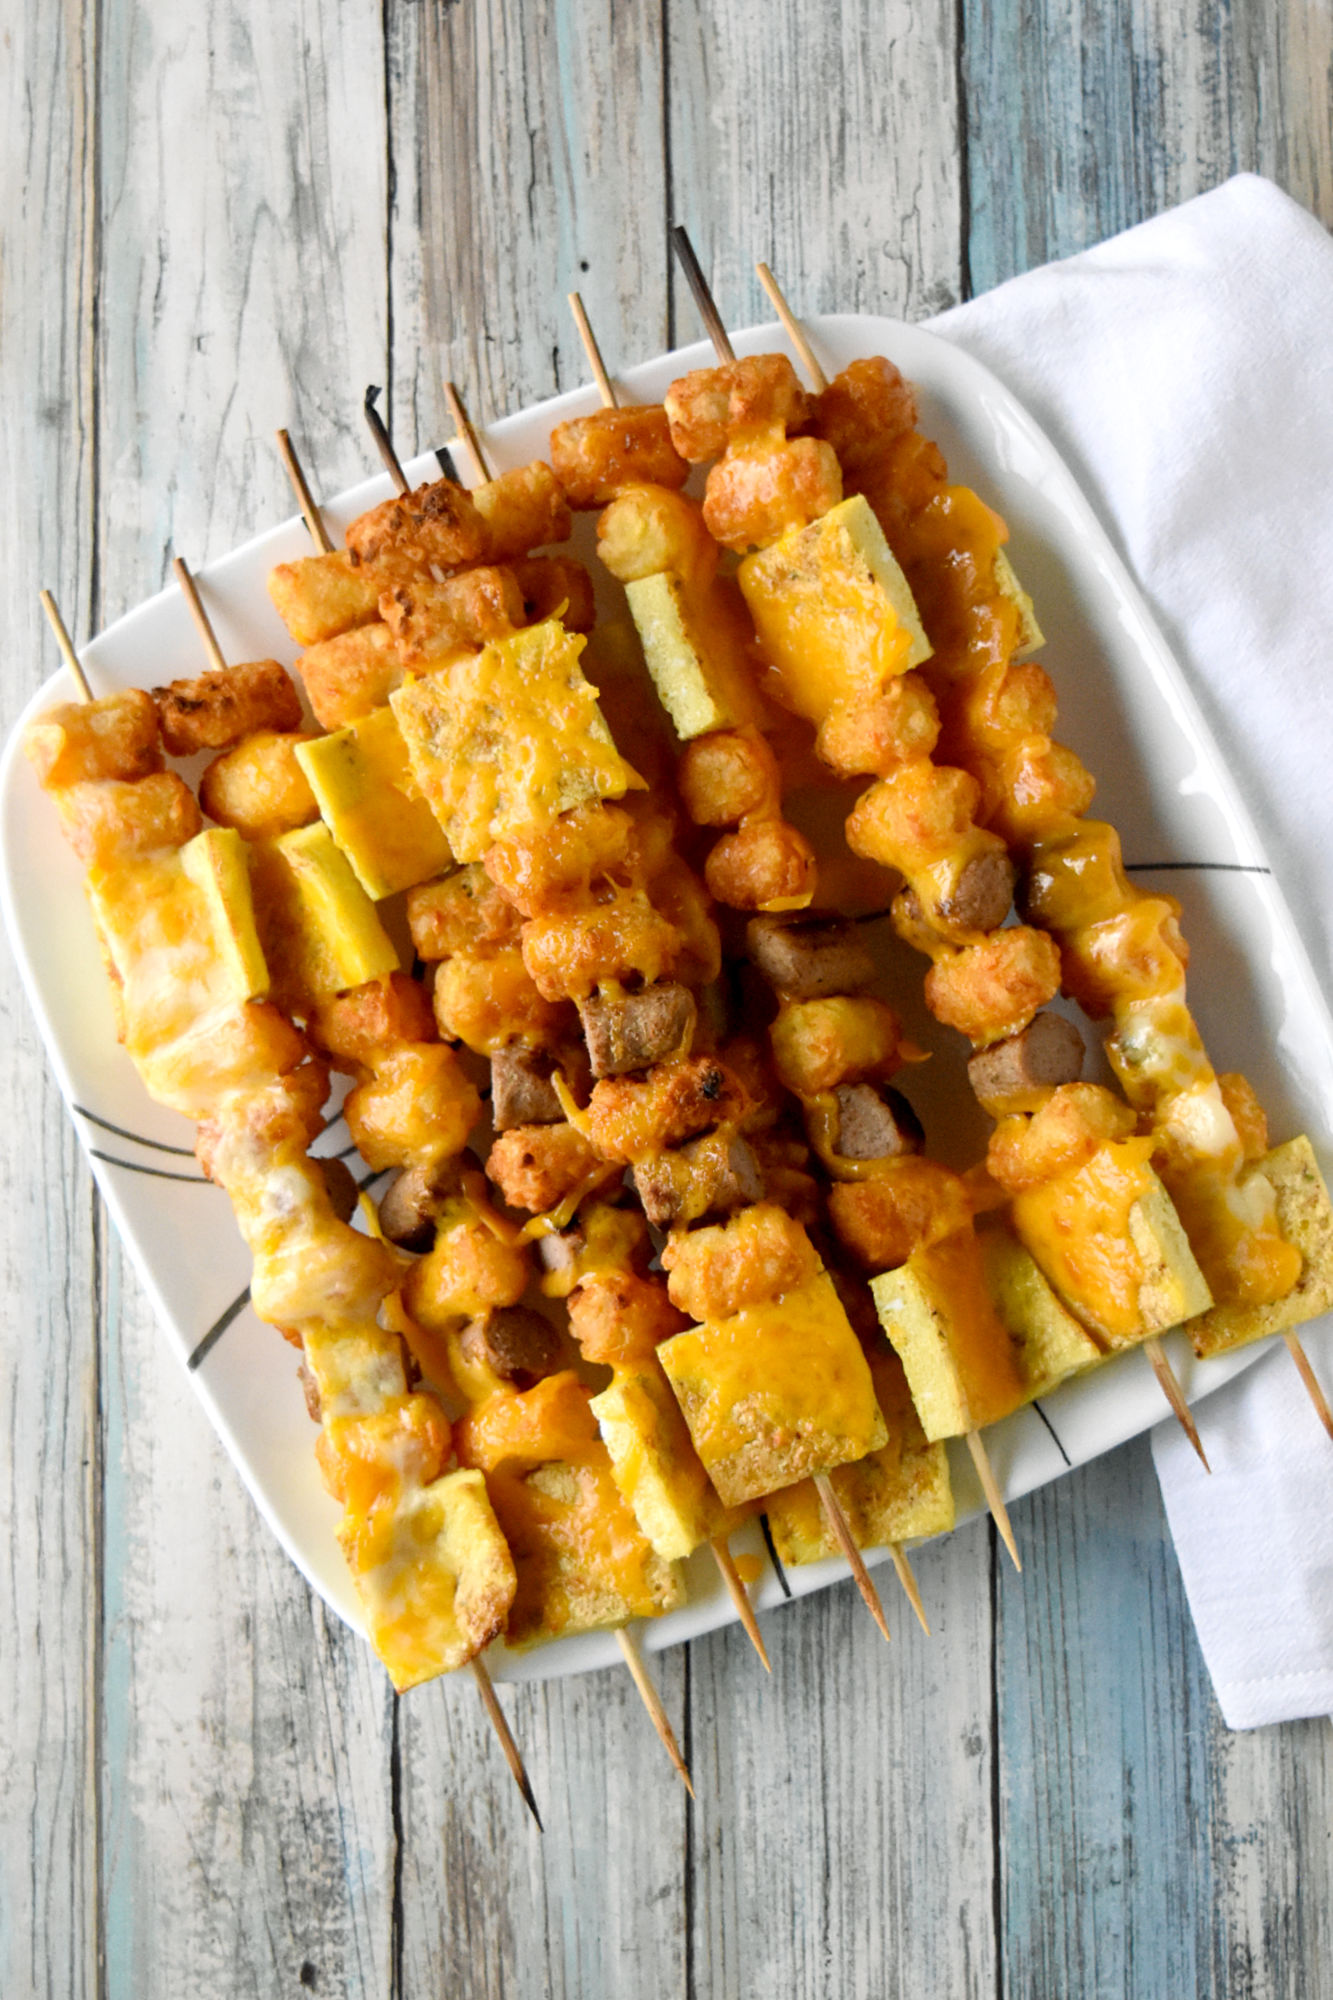 Breakfast Totcho Kabobs are fun and quick! The eggs and sausage bake while the tots air fry making these super easy to make. 